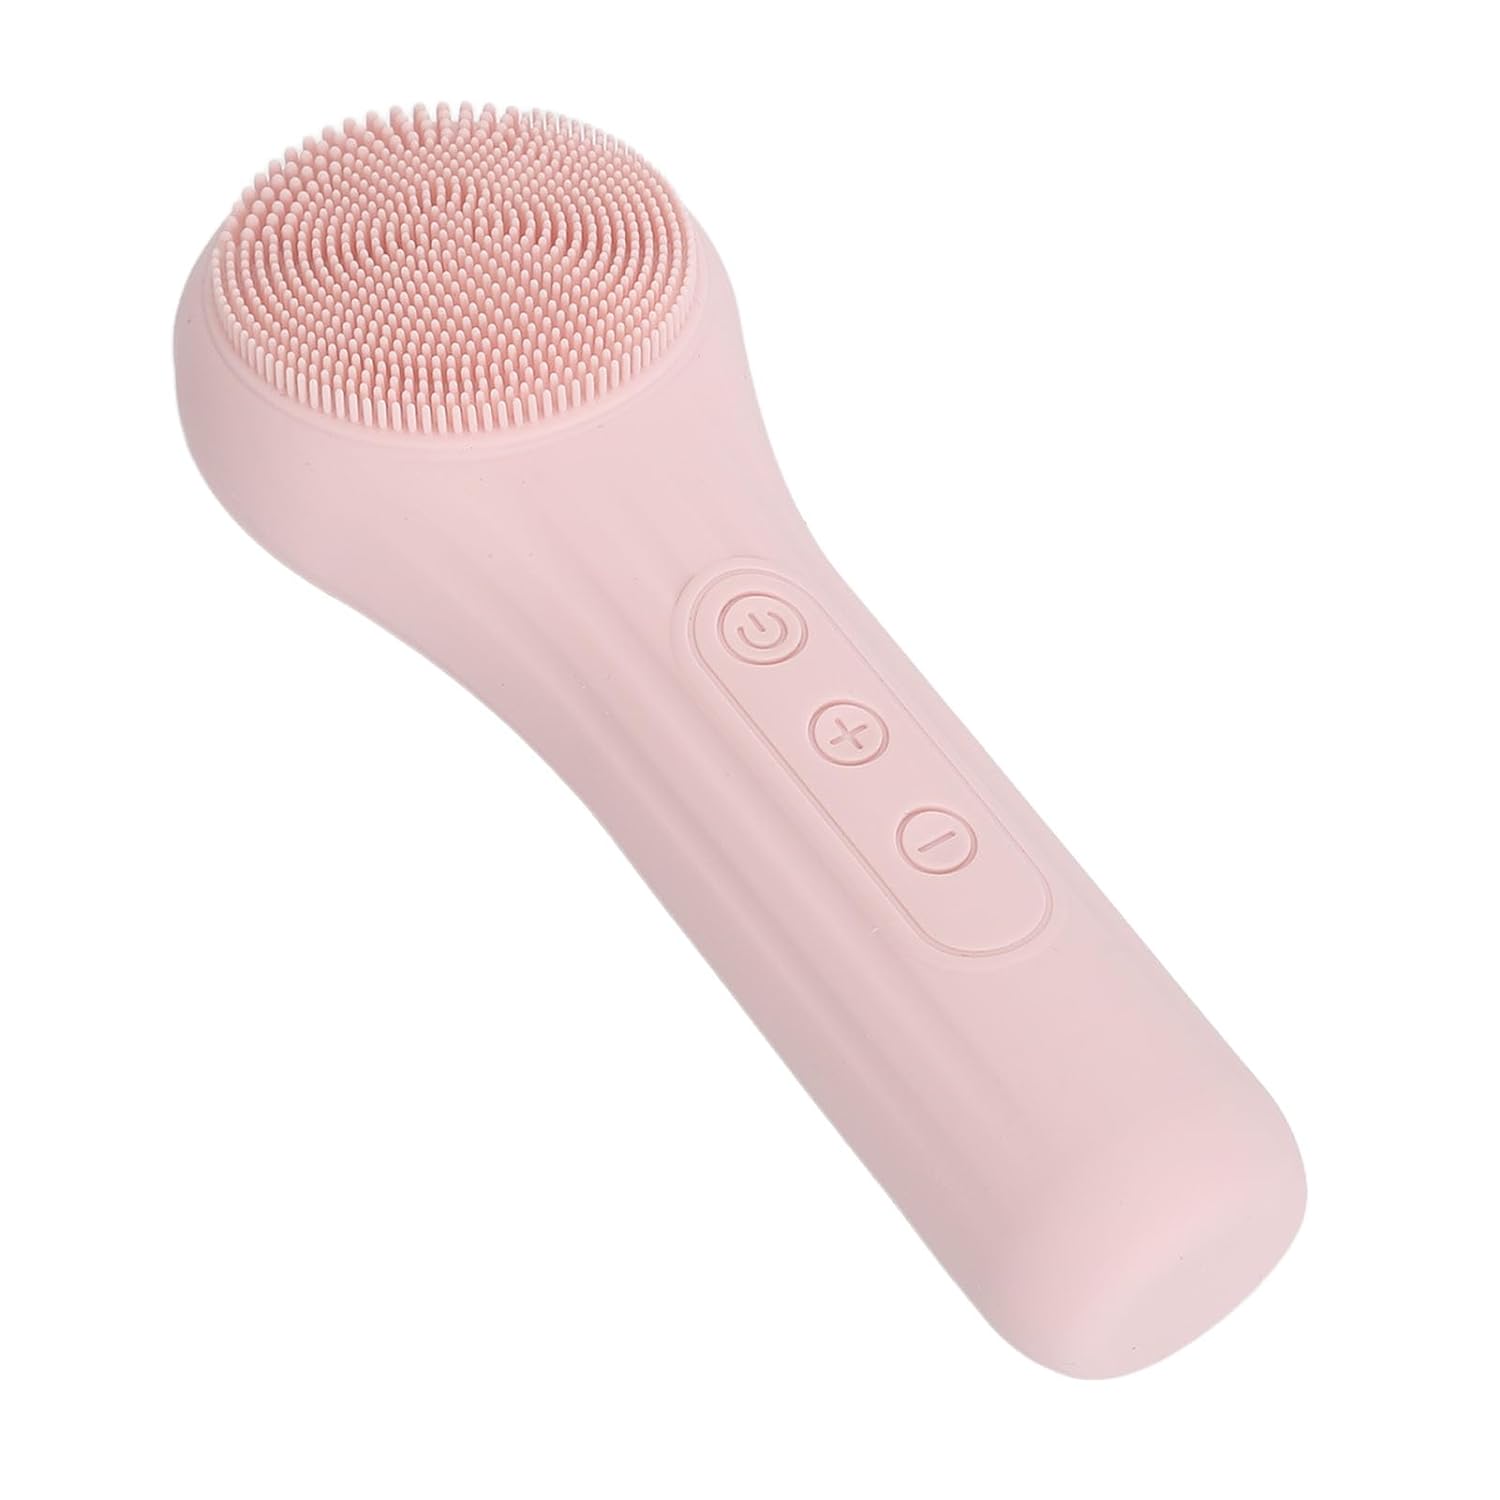 Electric Facial Cleansing Brush, Rechargeable Electric Face Scrubber Brush, Waterproof Vibration Heating for Home Use